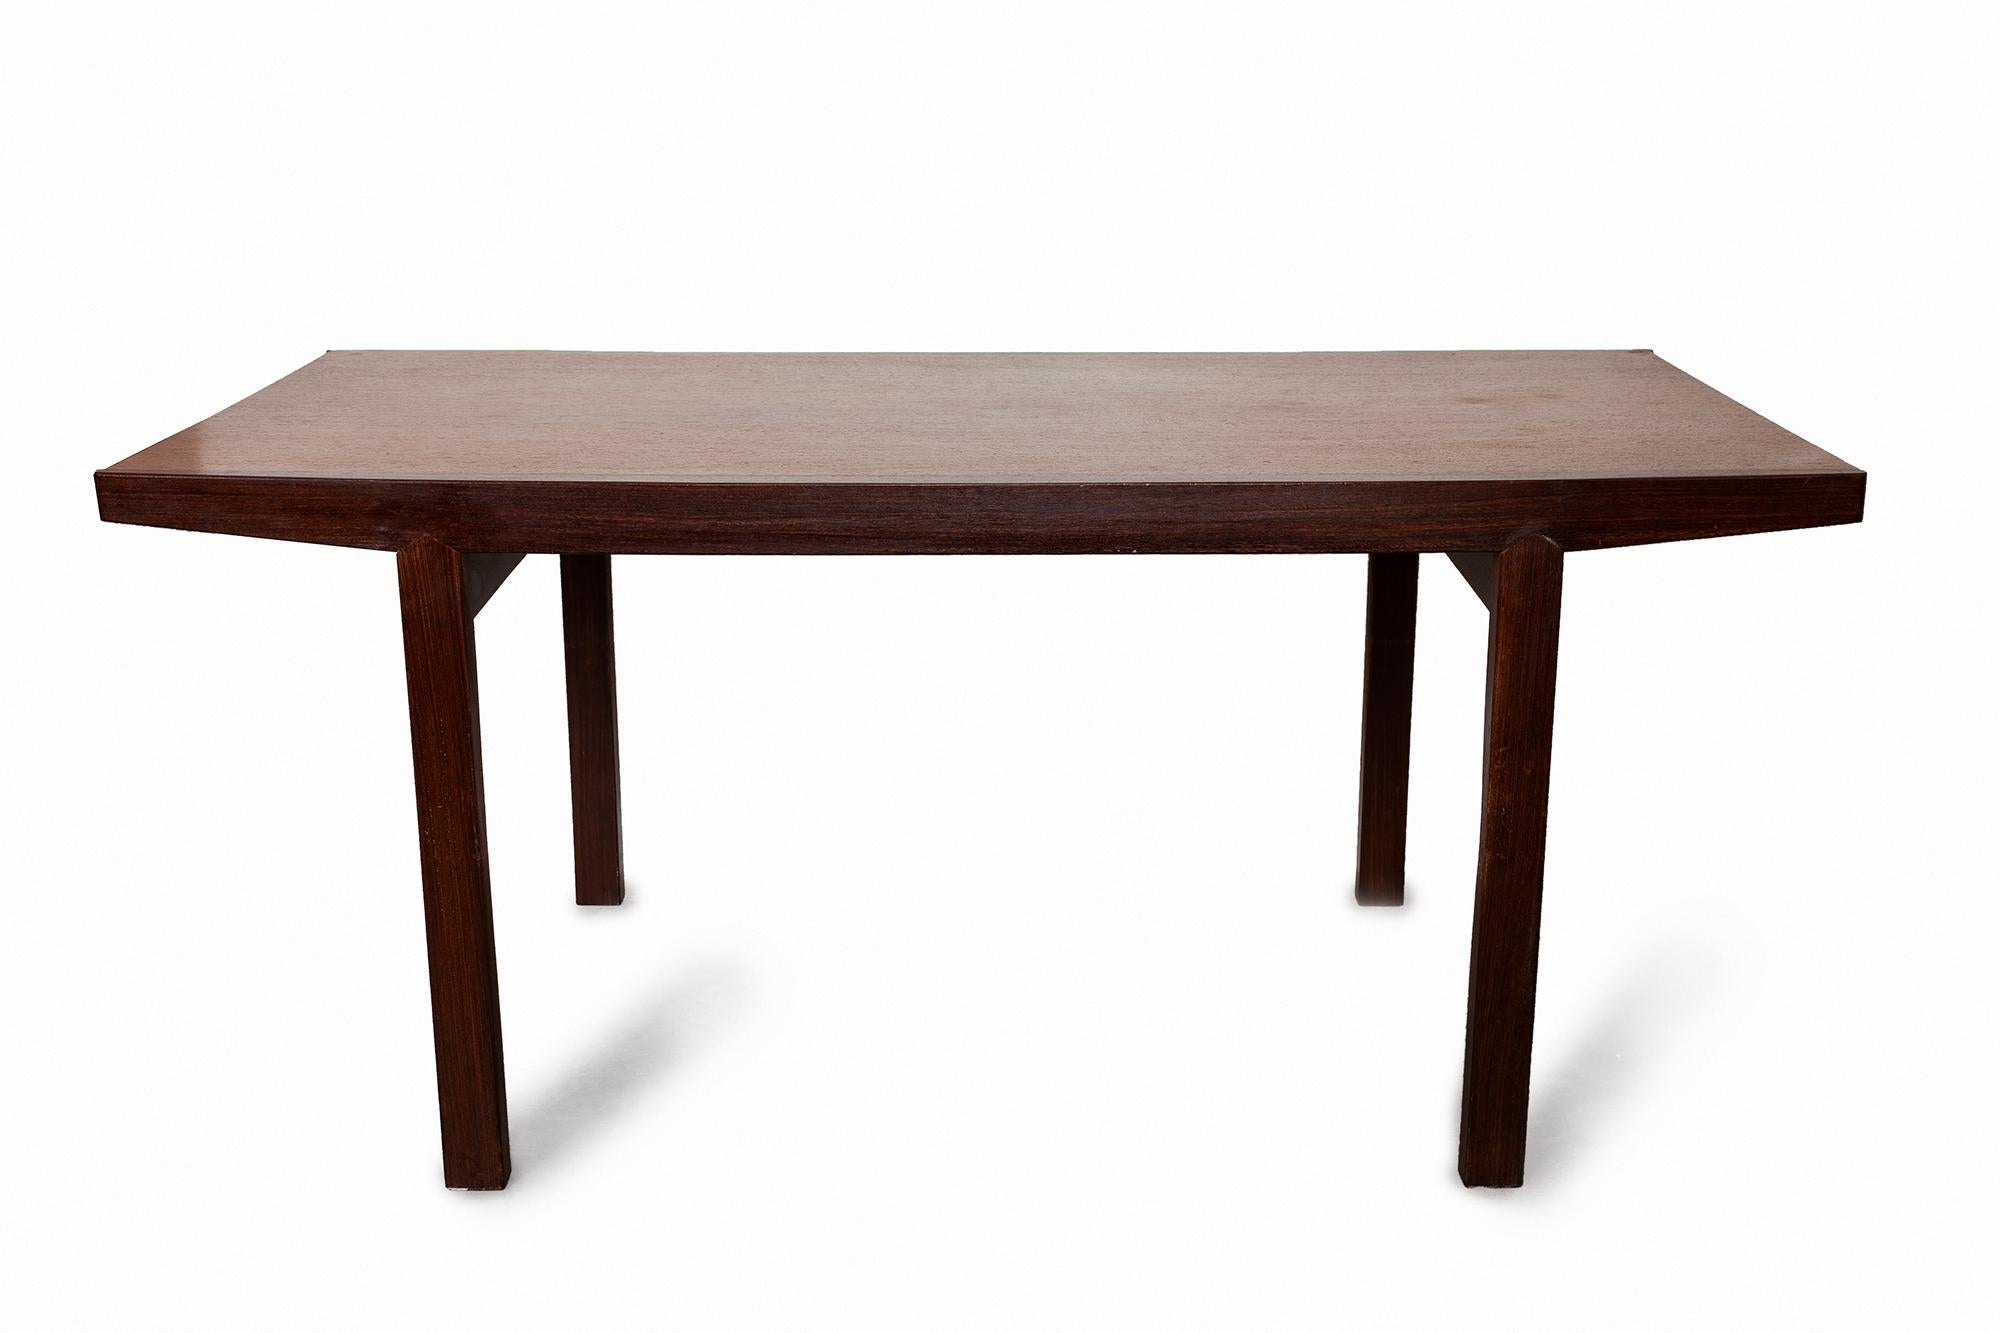 Martin Visser for 't spectrum, dining table, in wengé and teak, the Netherlands, 1960s. Beautiful wengé dining table with rectangular top. The base consist of four legs of solid wengé. The teak top shows an exceptional and expressive grain. Very